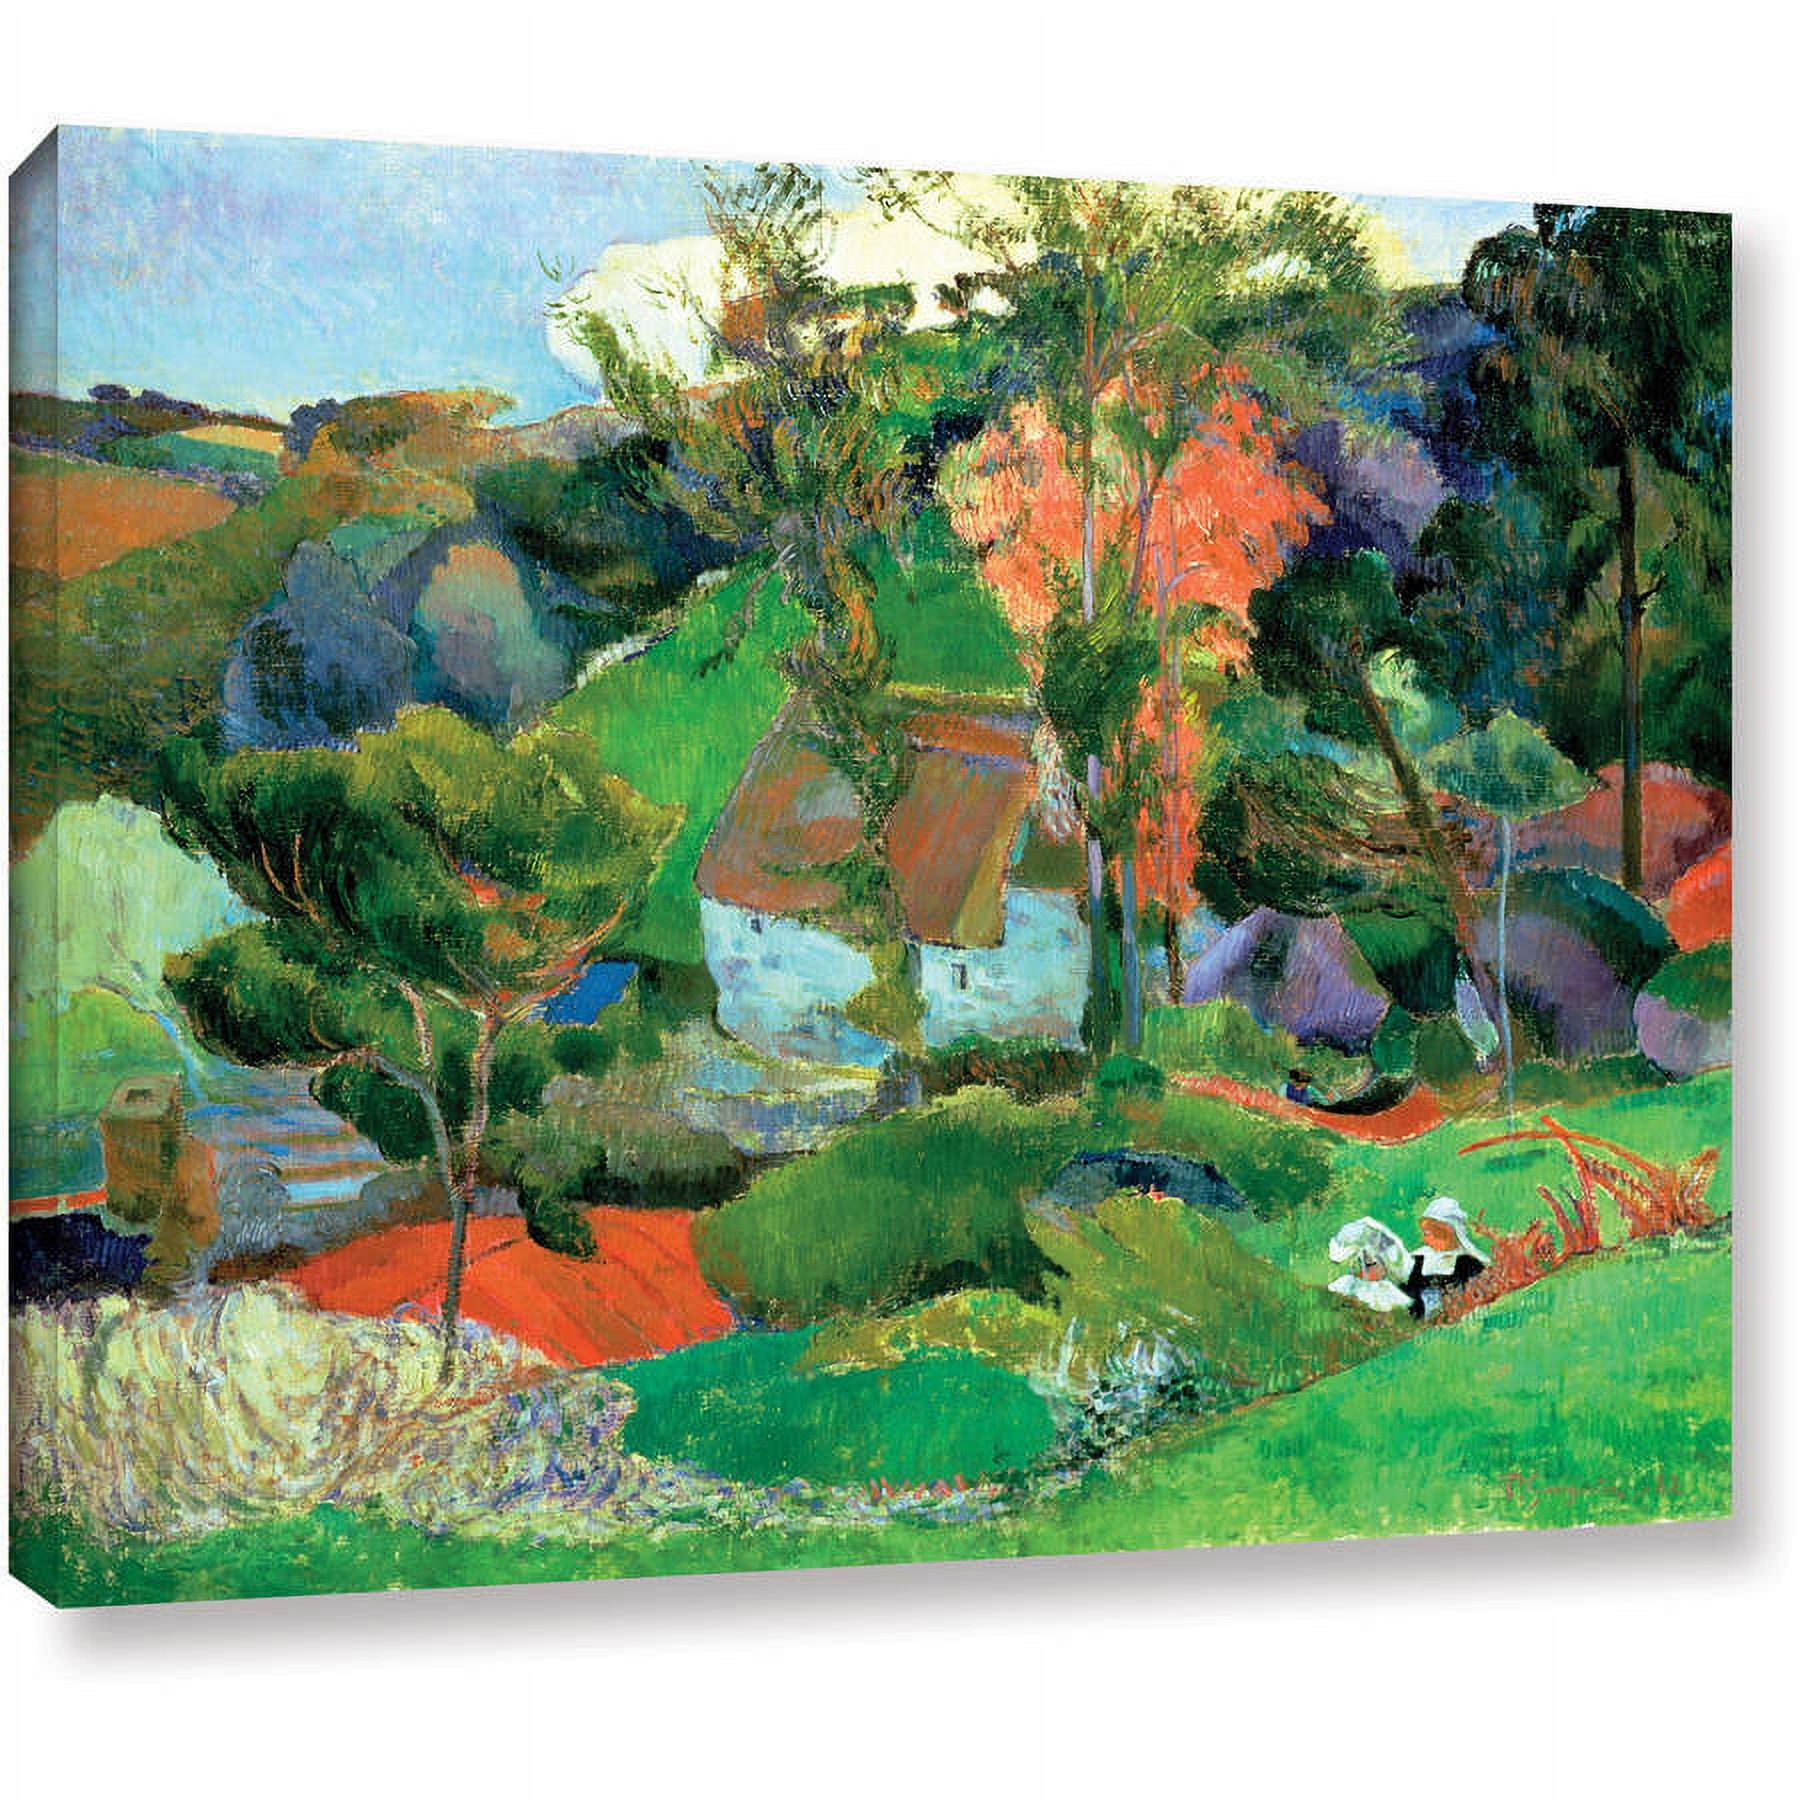 ArtWall Paul Gauguin "Landscape at Pont Aven" Gallery-wrapped Canvas - image 1 of 2